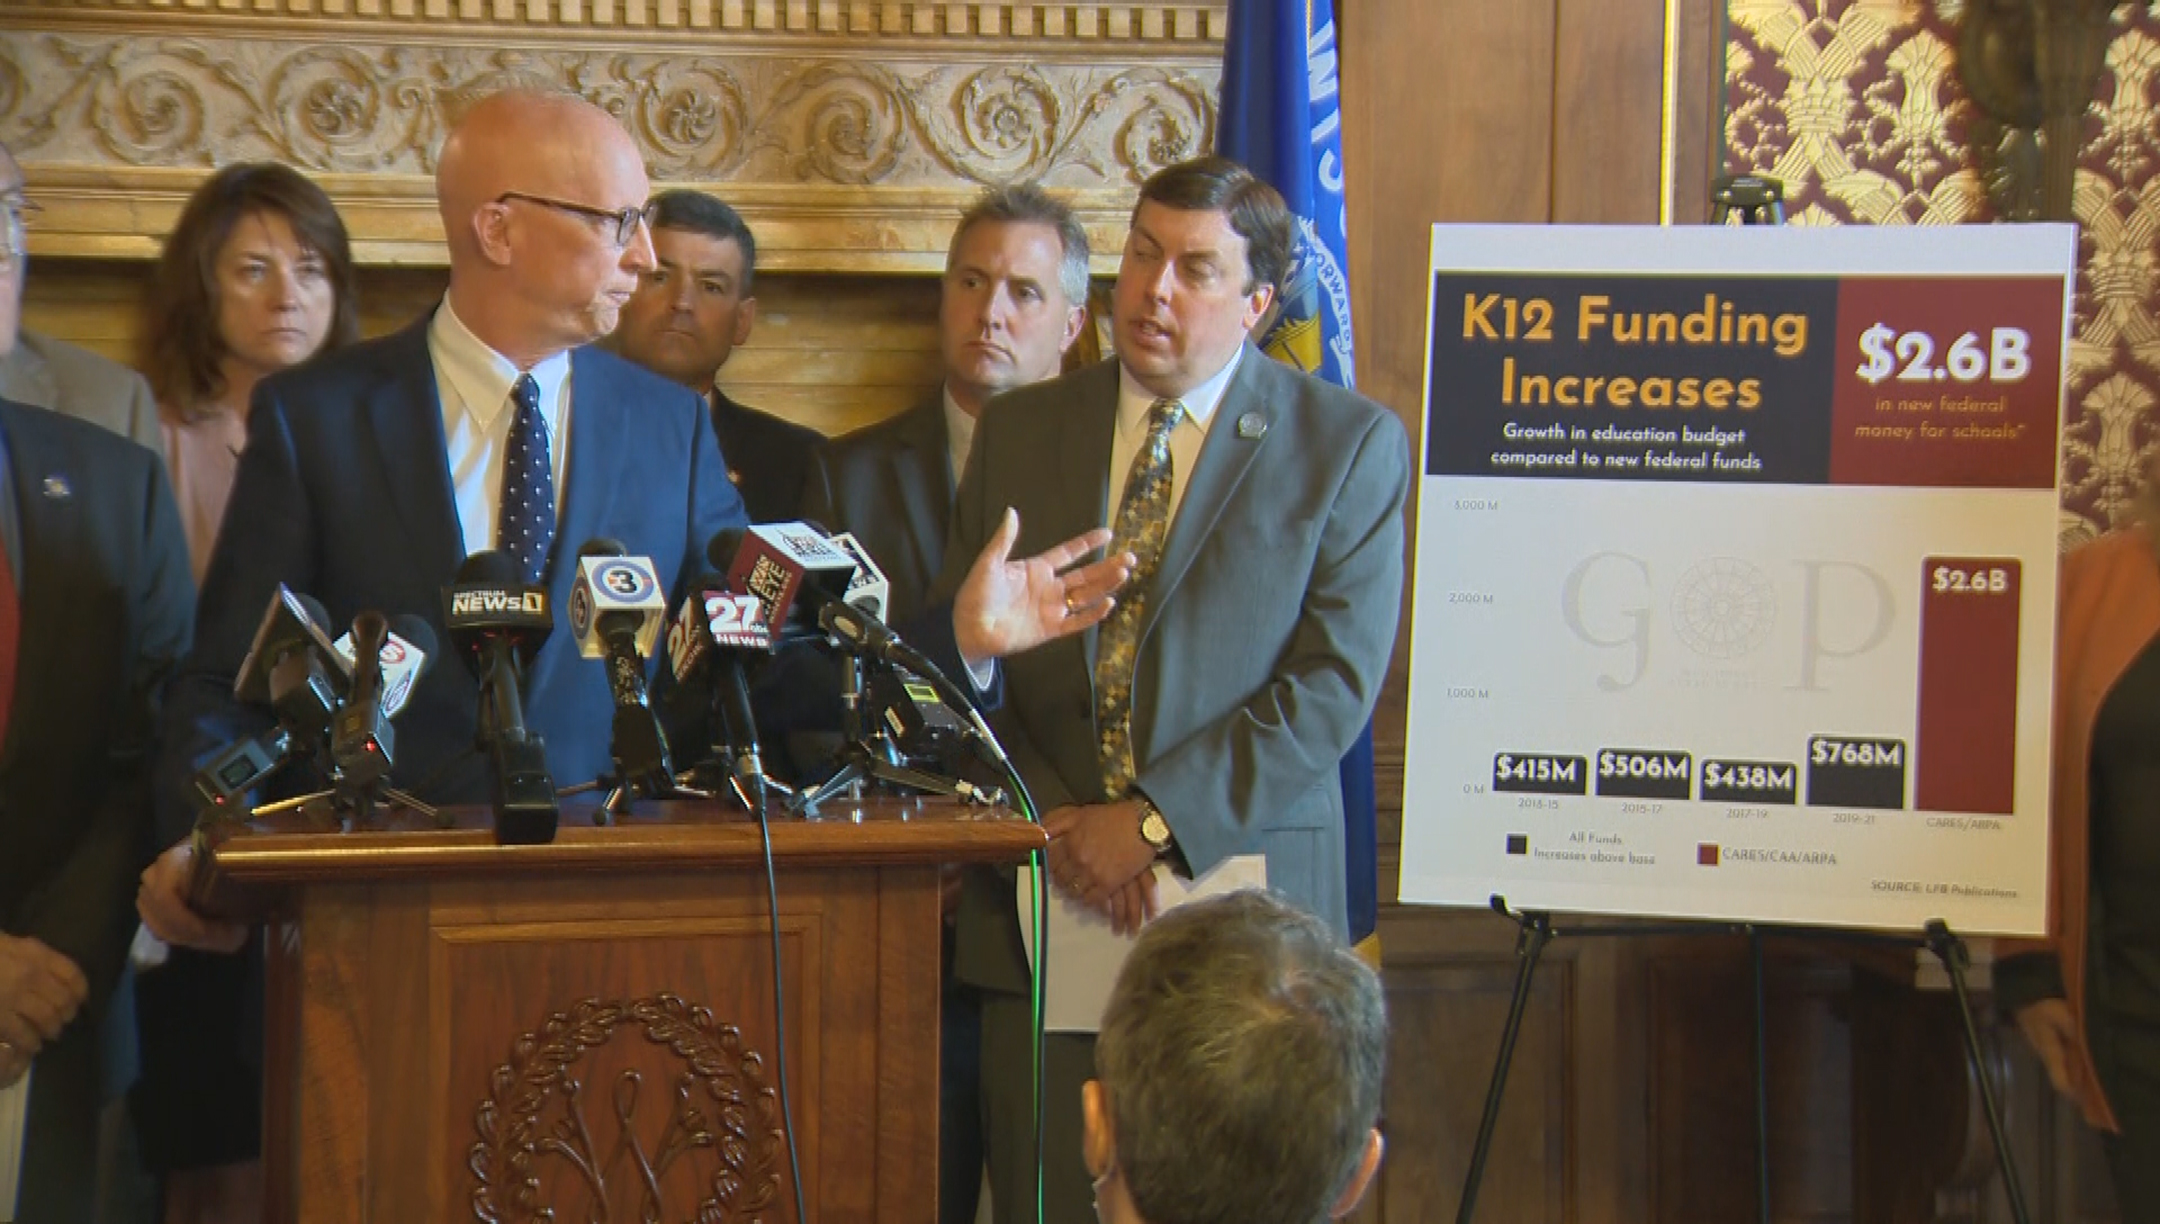 Bald man stands at a podium with six people behind him as he gestures at a poster of a graph titled K12 Funding Increases